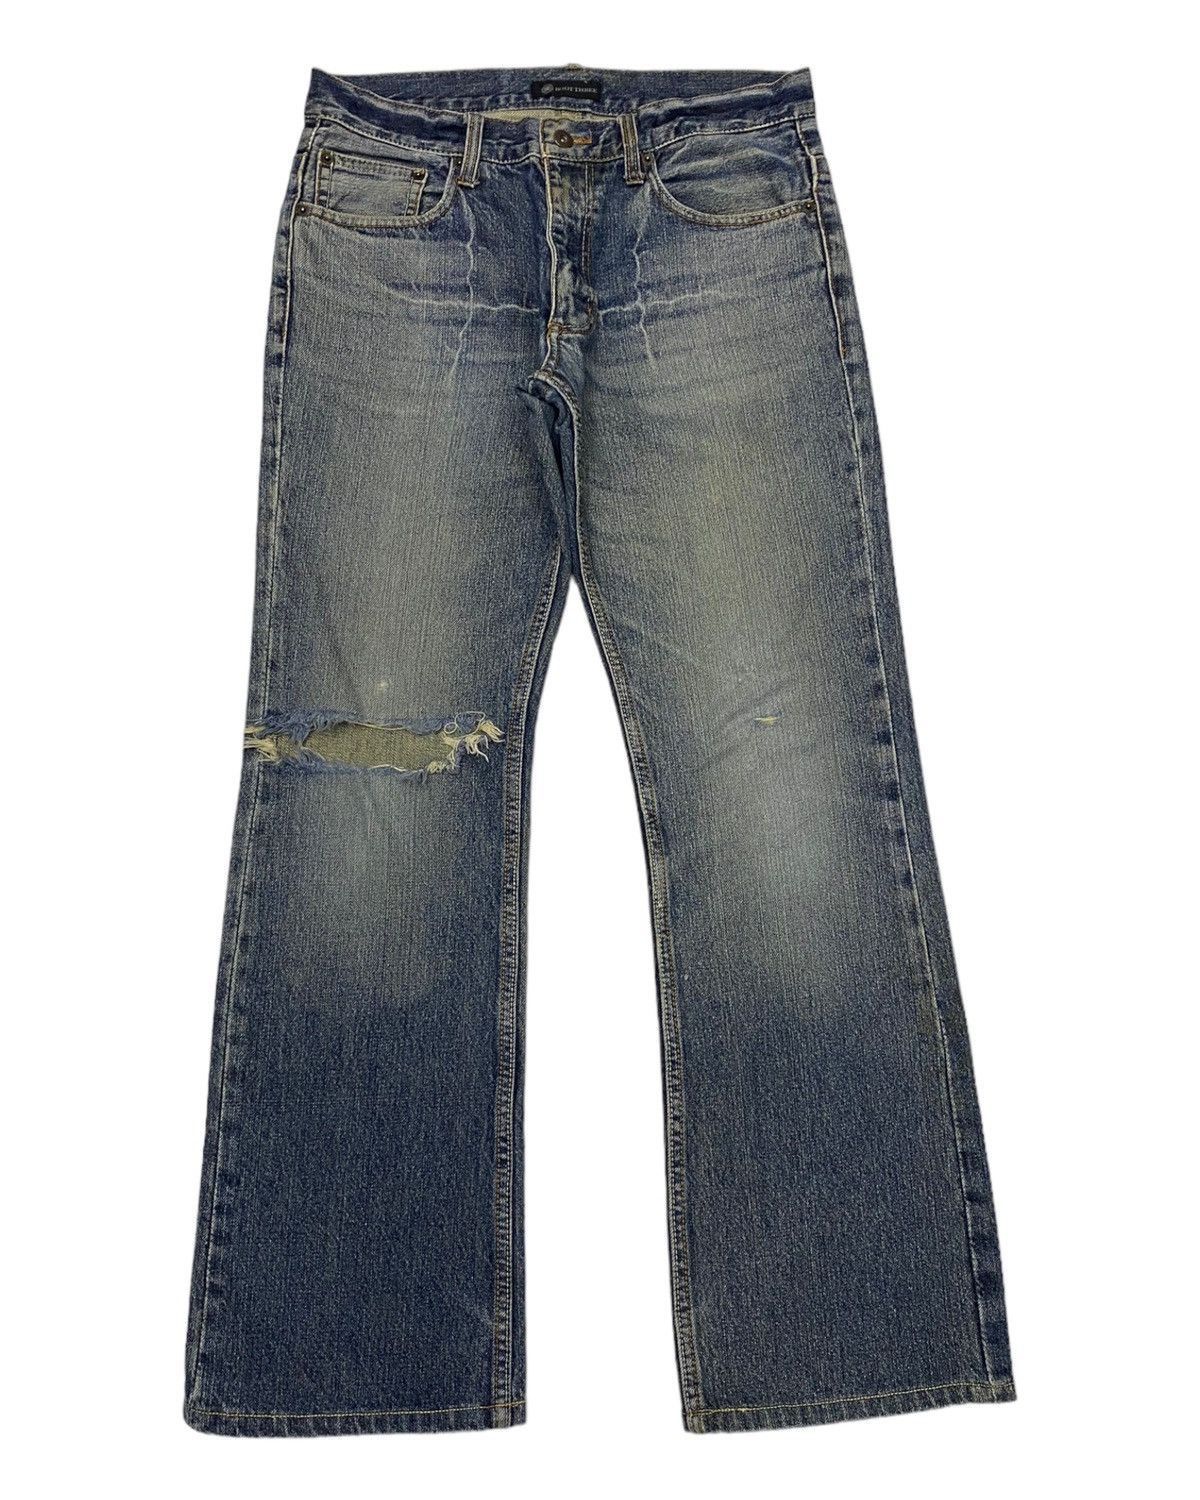 Archival Clothing - FLARED🔥ROOT THREE DISTRESSED DENIM JEANS - 1